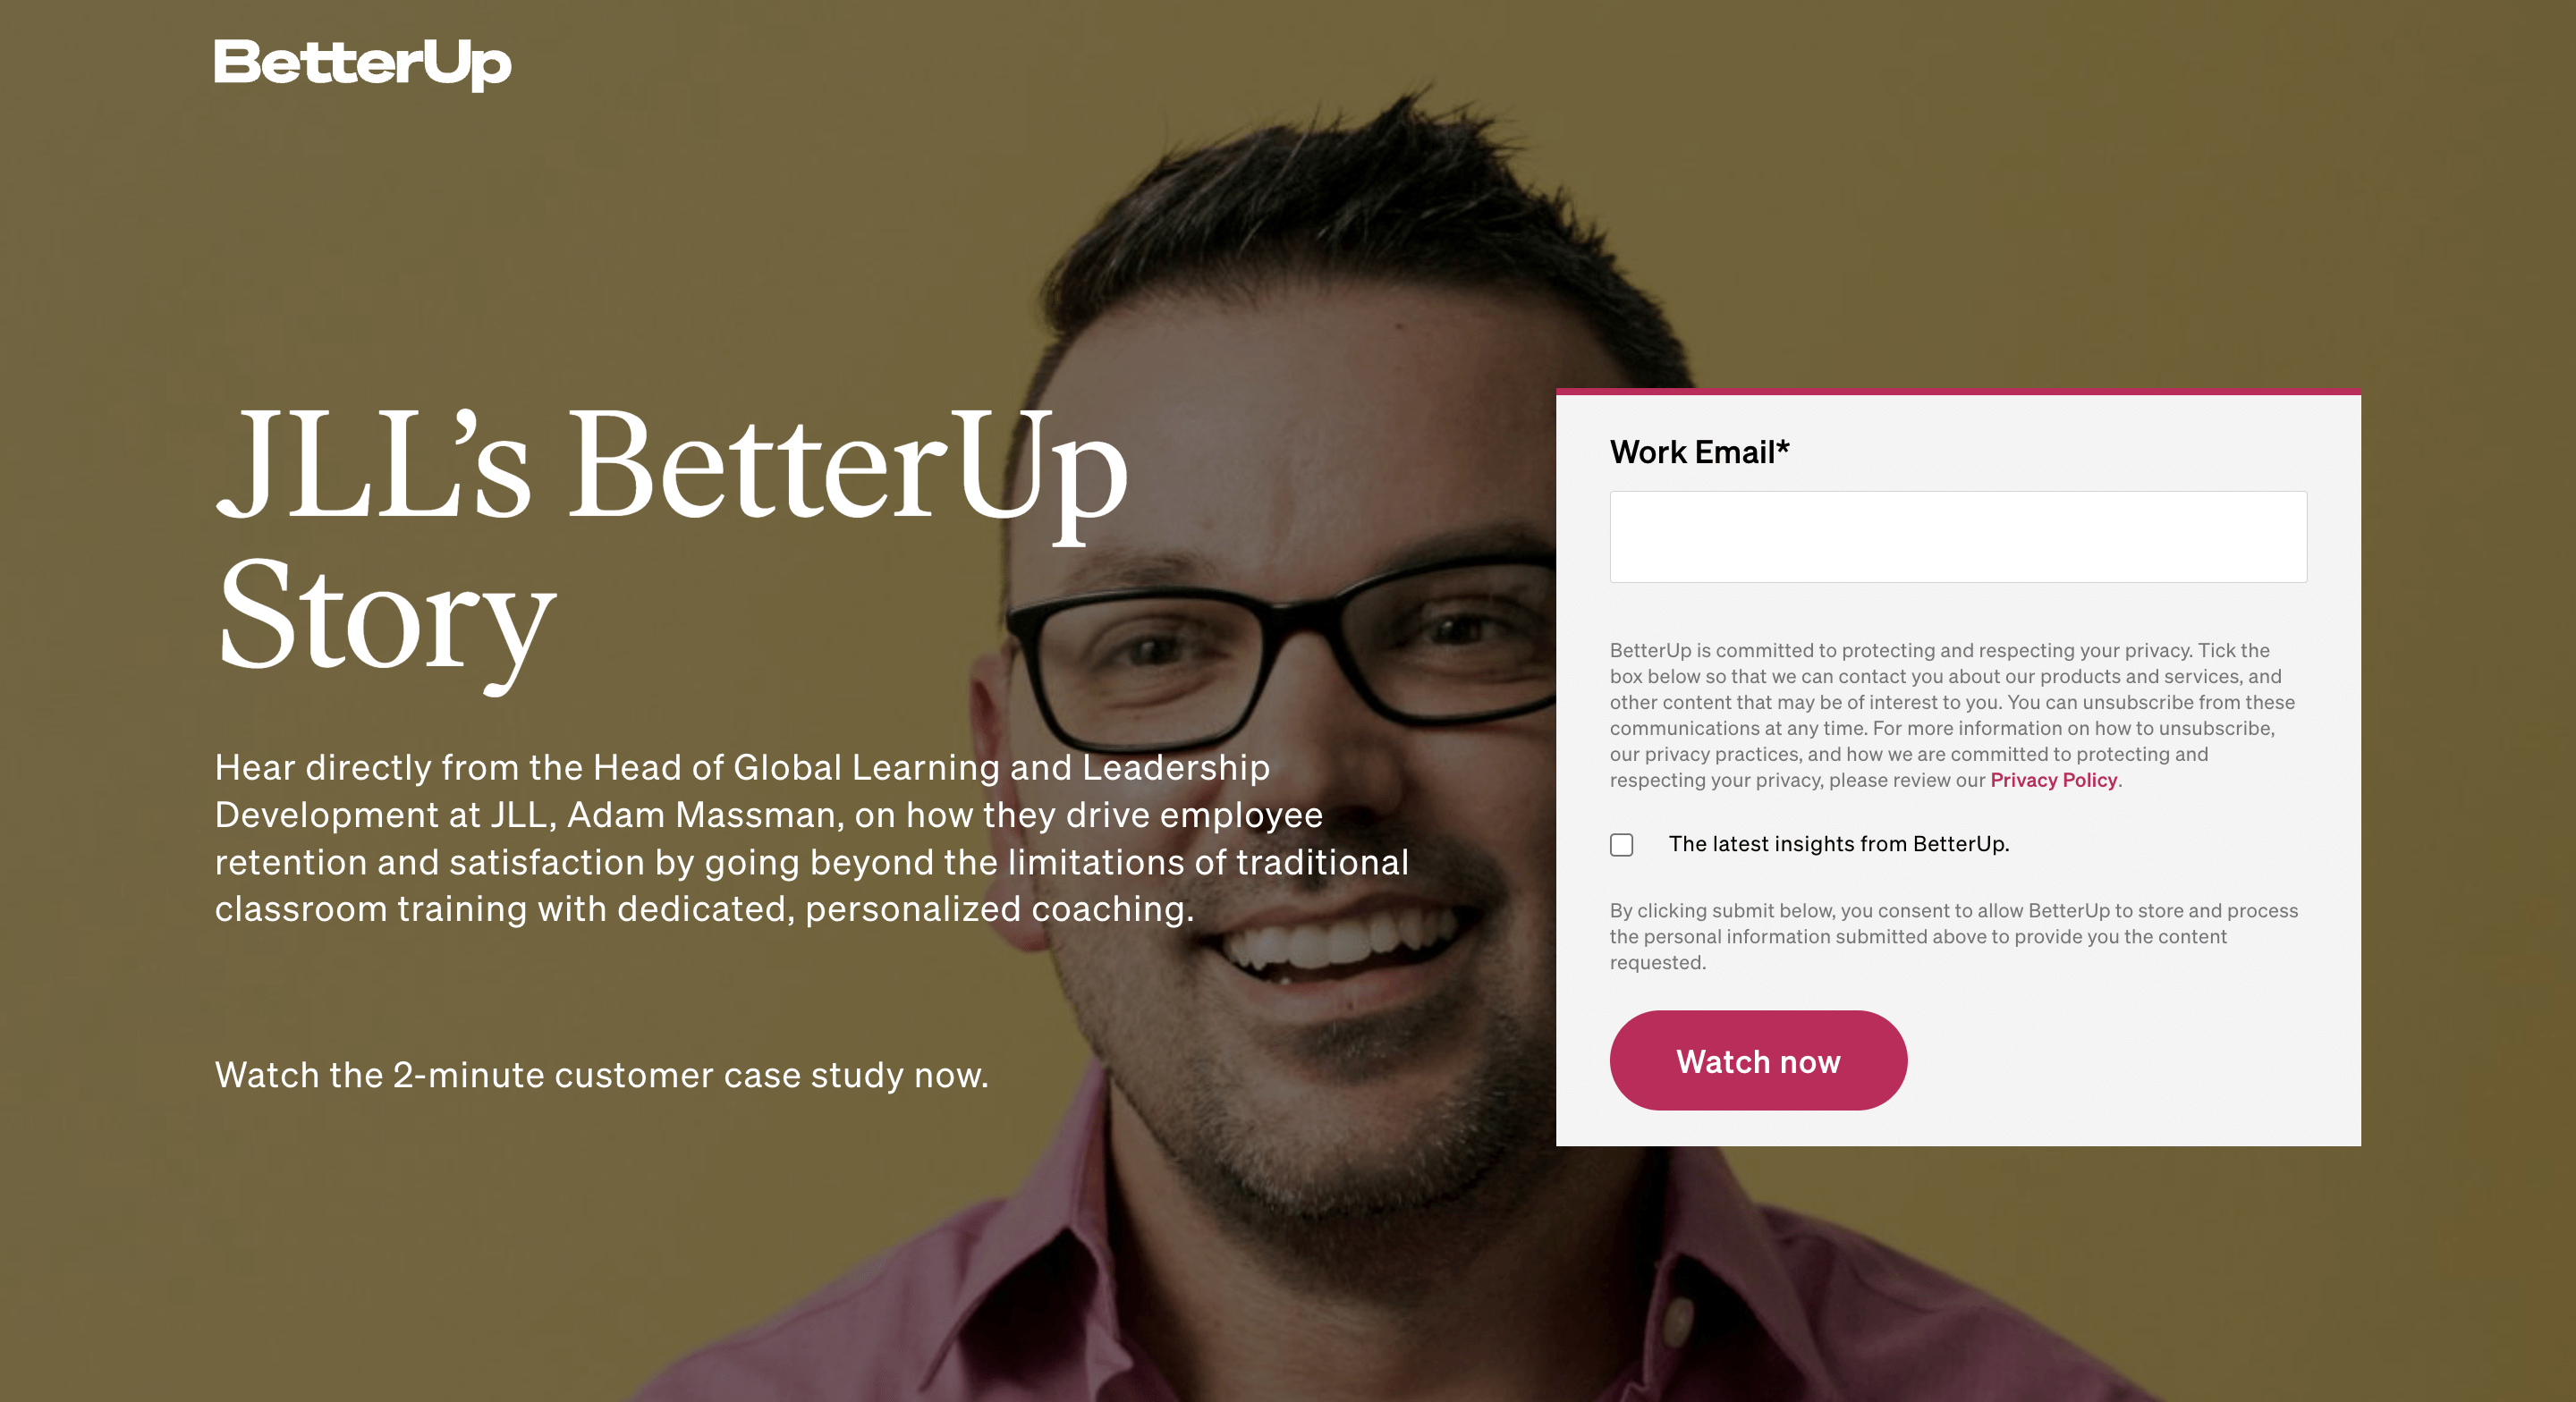 SaaS Lead Magnets: Screenshot of BetterUp's case study lead magnet page